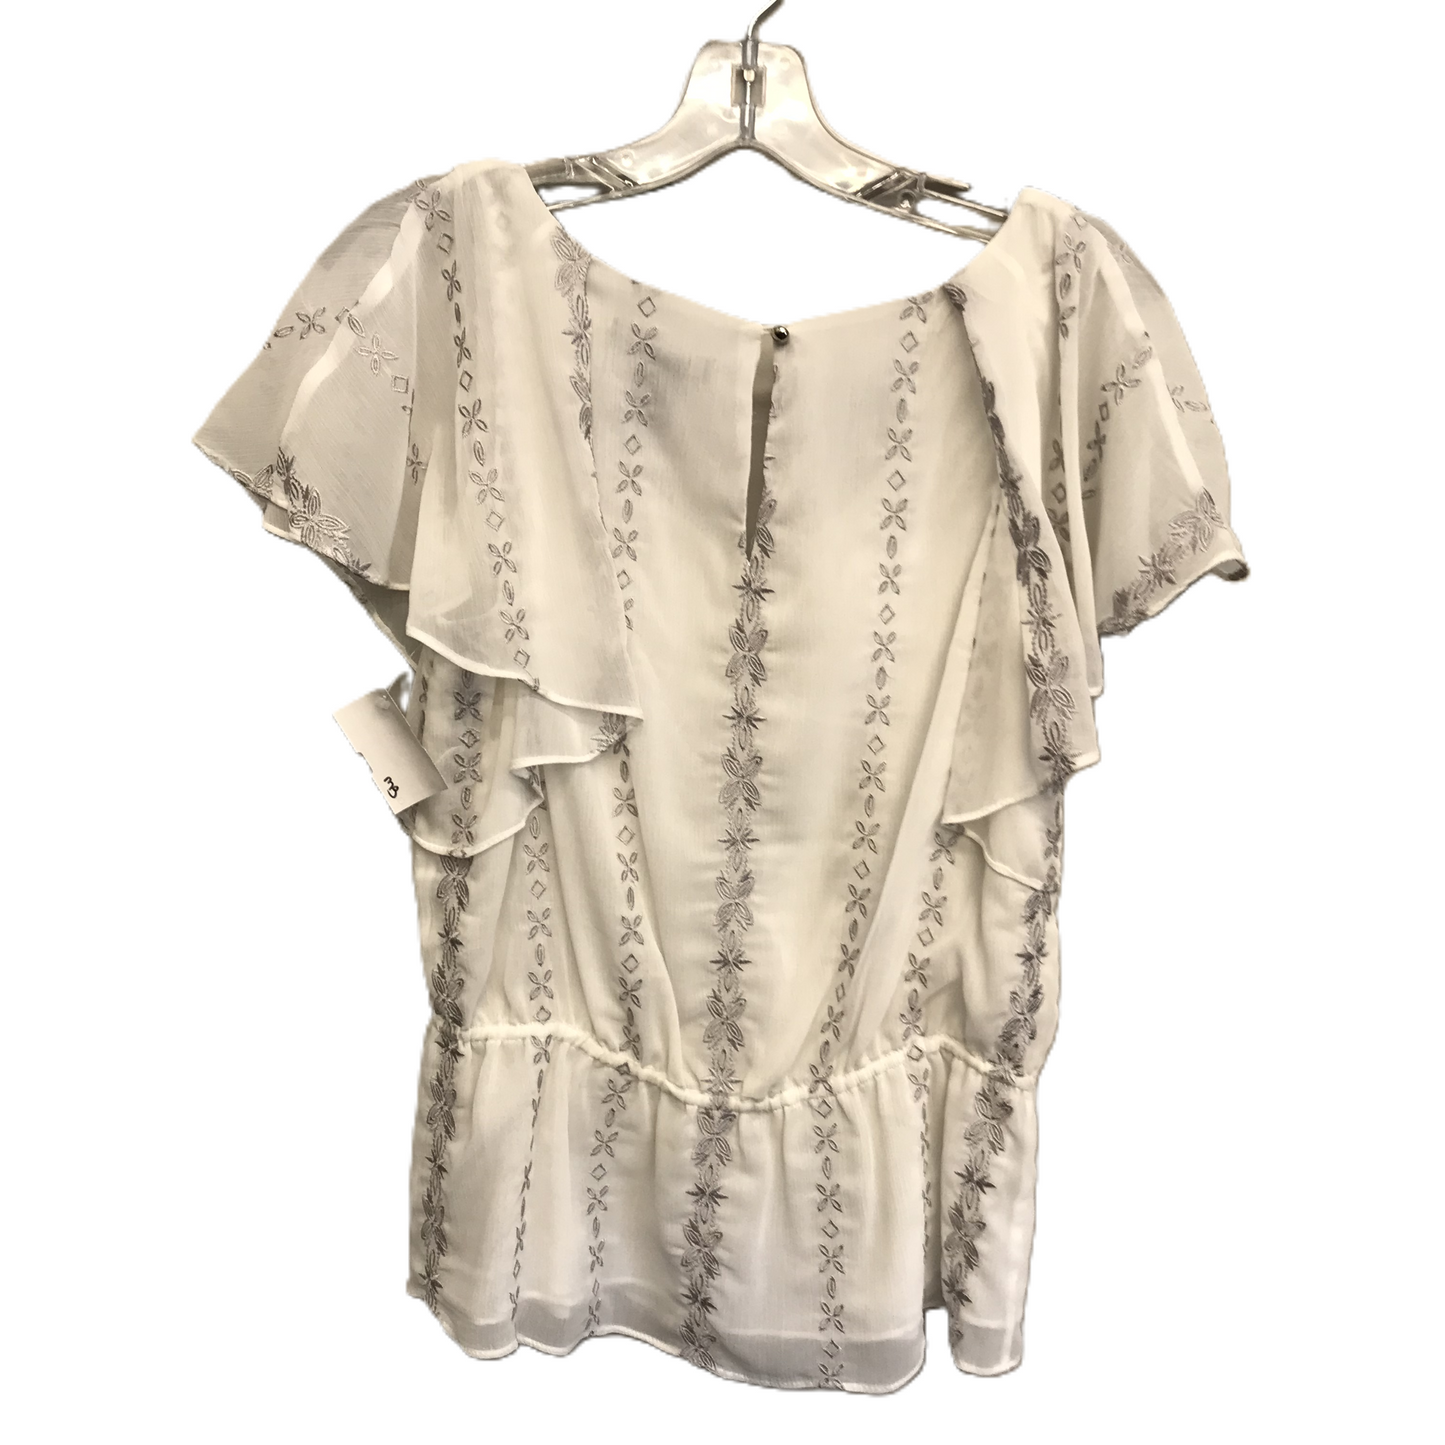 White Top Short Sleeve By White House Black Market, Size: S